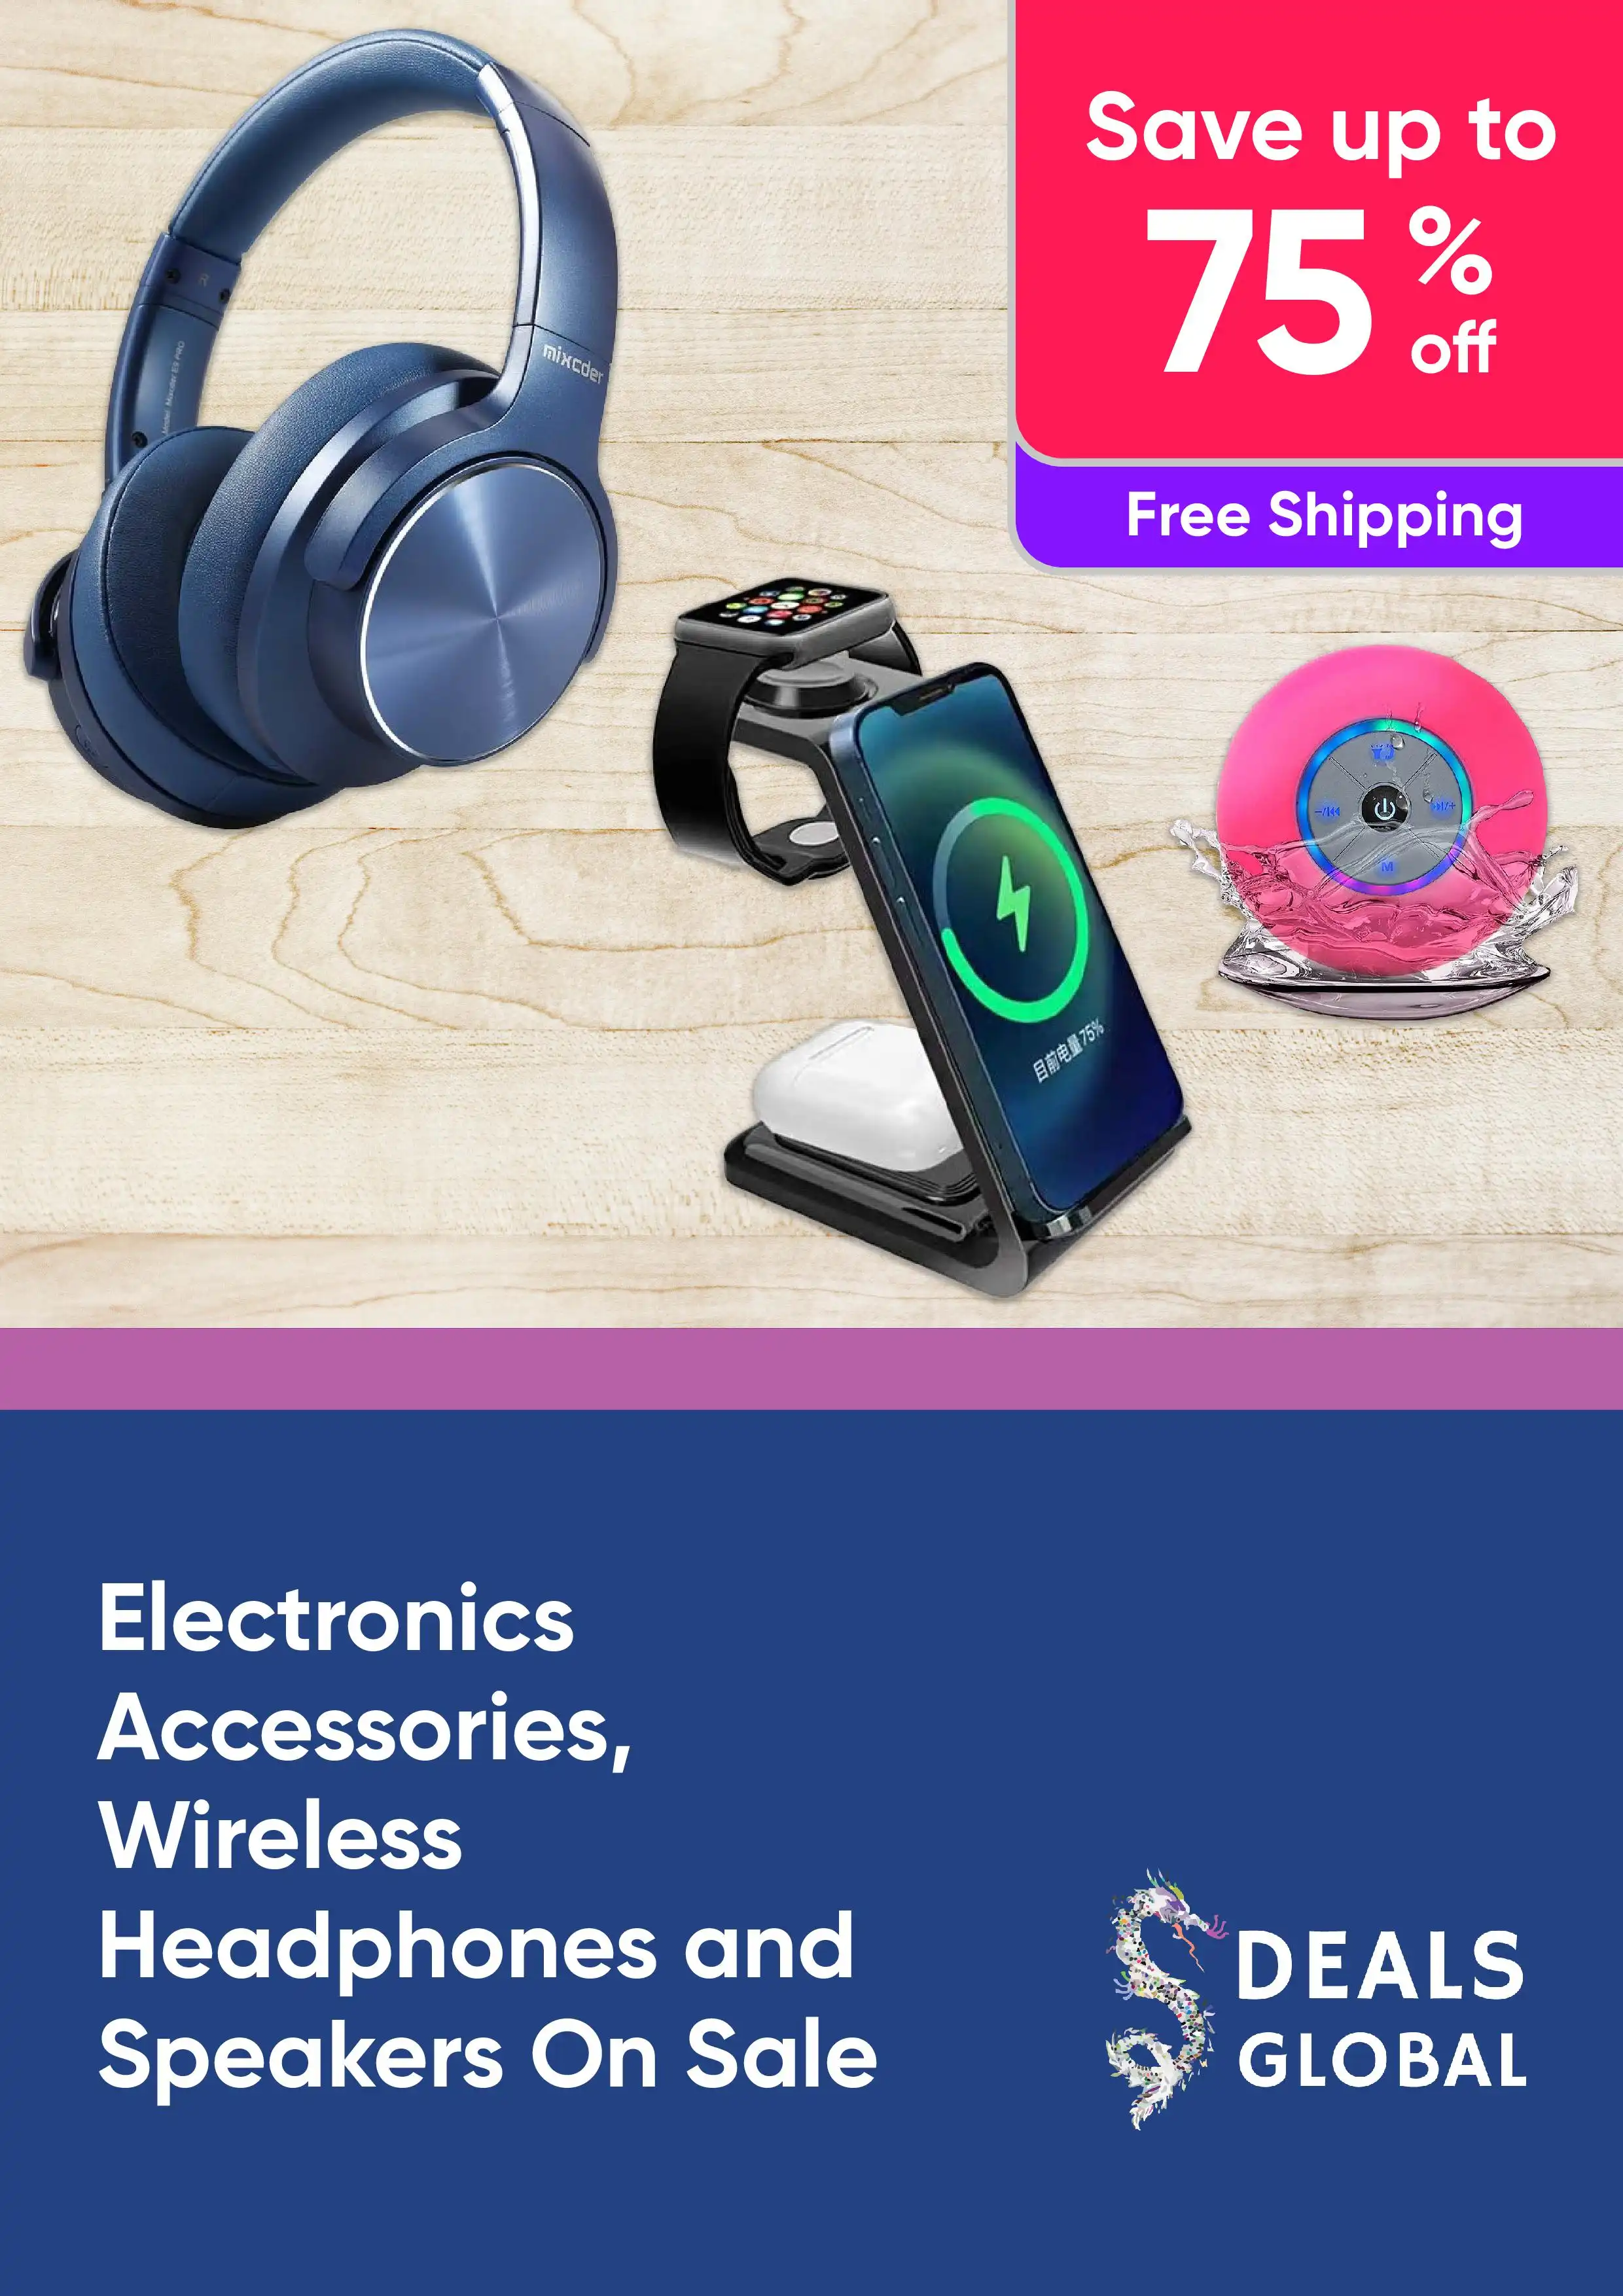 Electronic Accessories, Wireless Headphones and Speakers On Sale - Save up to 75% Off